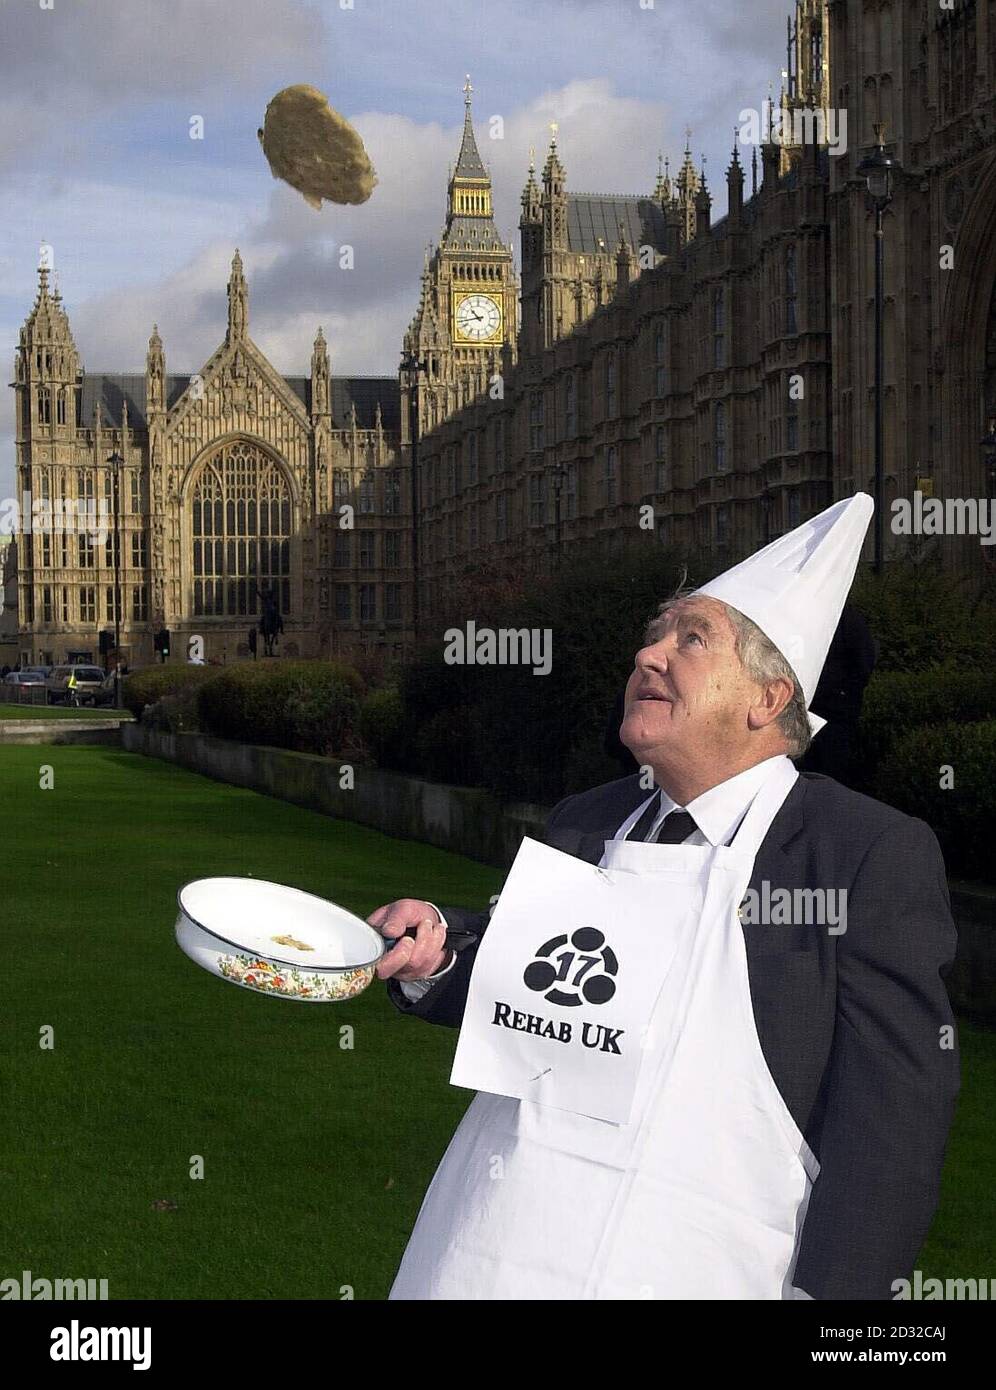 Lord Morris of Manchester, takes part in the annual Shrove Tuesday Parliamentary pancake race on the green opposite the House of Lords in Westminster, London. The event, in aid of brain injury charity Rehab UK, involves a team of MPs and a team from the Lords,  *   donning tall chefs' hats and whites and racing each other while tossing pancakes three feet into the air. Stock Photo